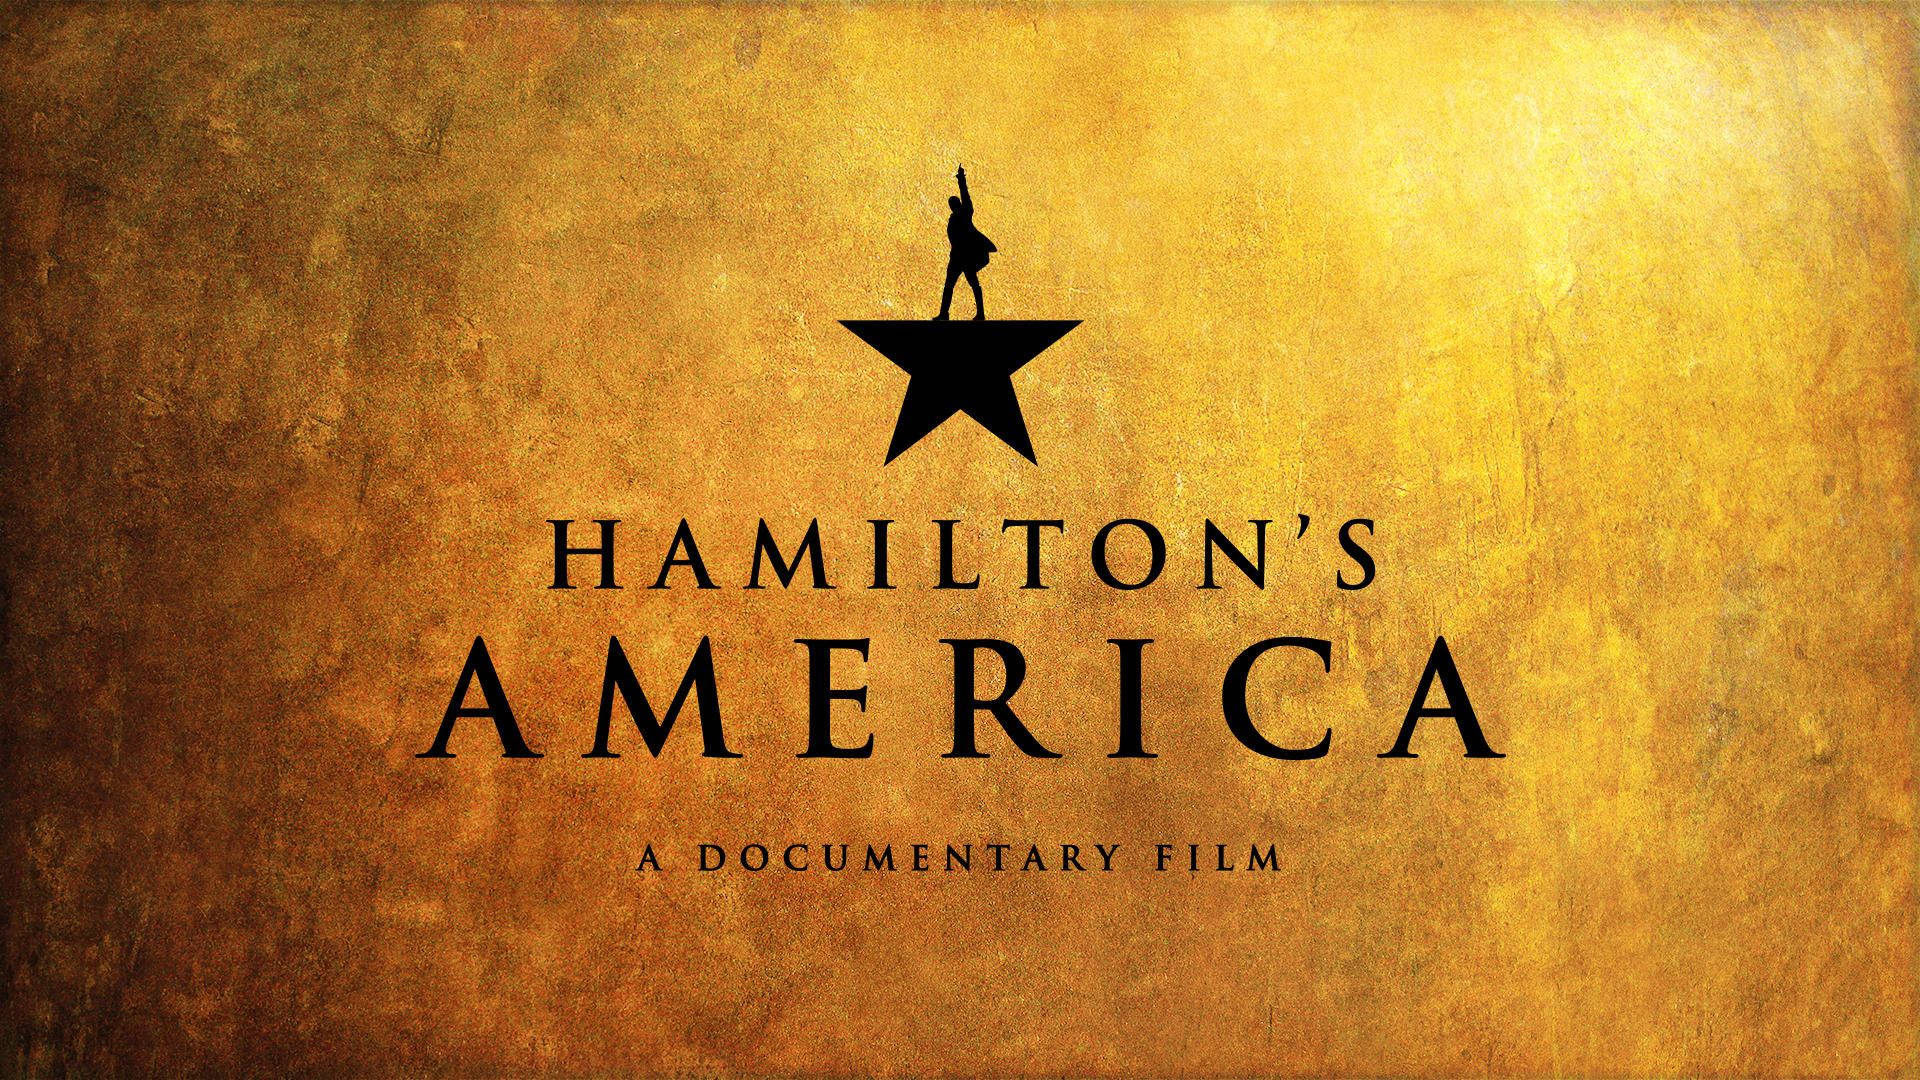 The poster for hamilton's america, a movie - Broadway